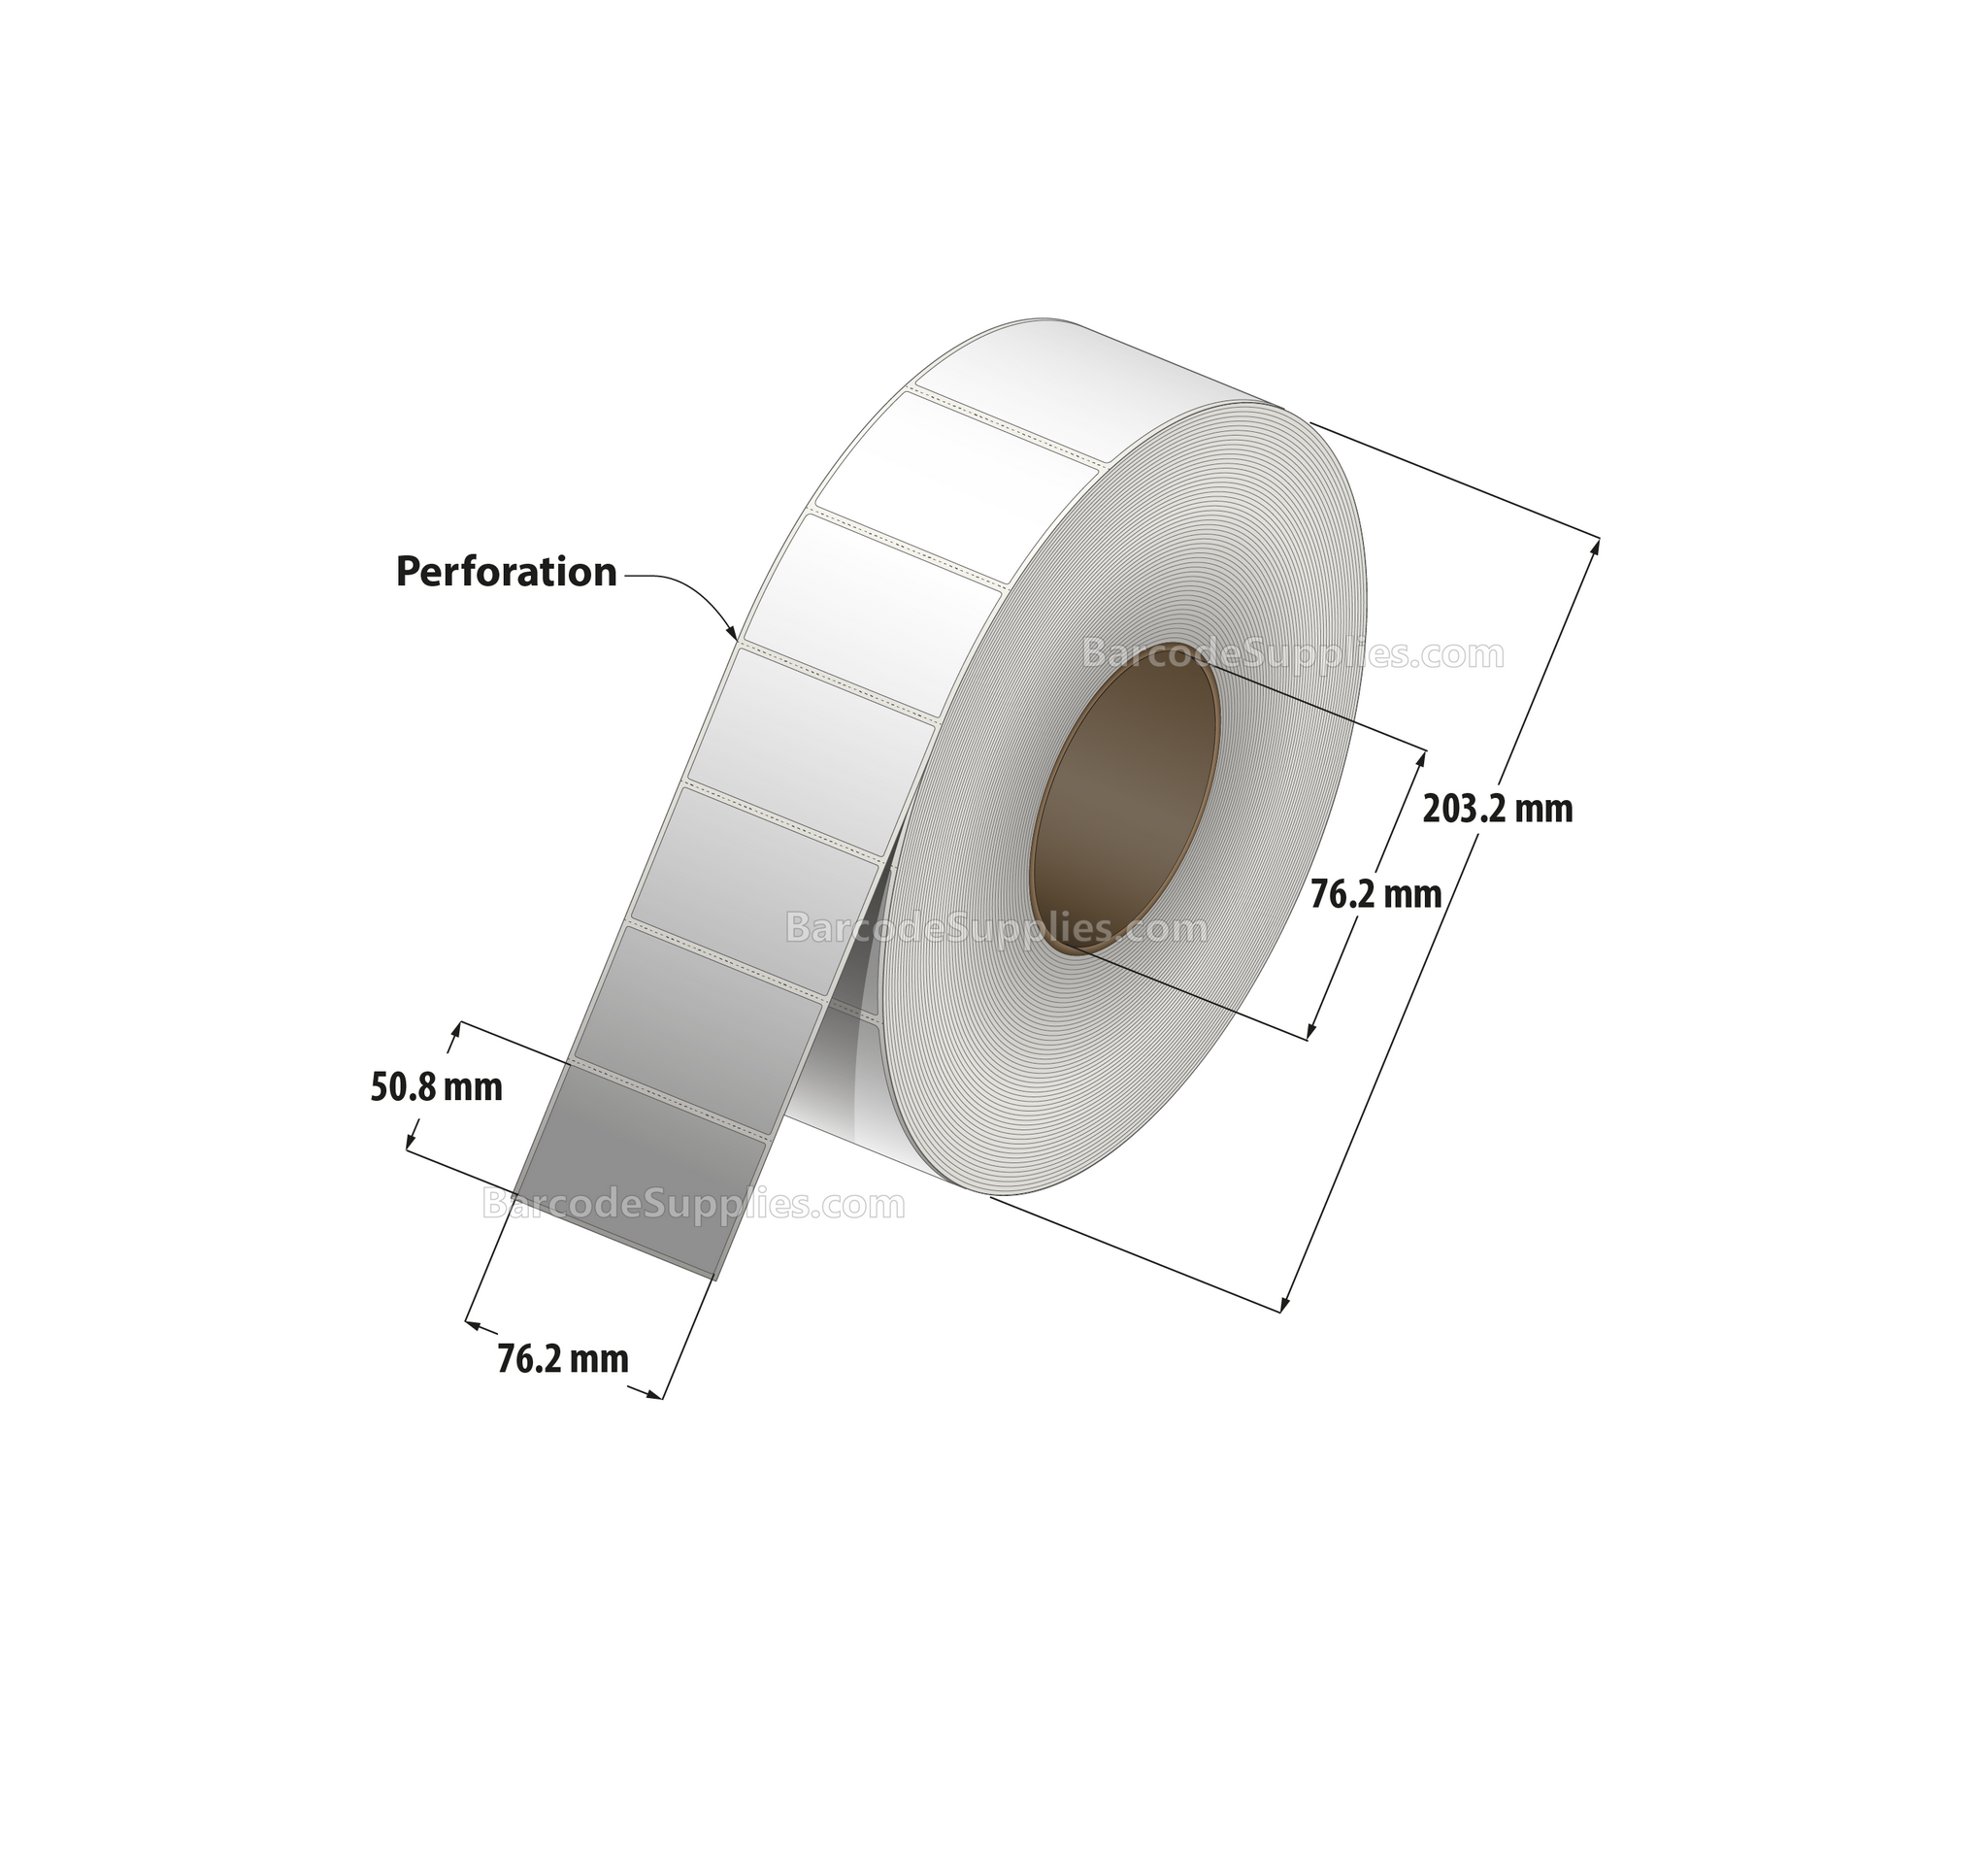 3 x 2 Thermal Transfer White Labels With Permanent Acrylic Adhesive - Perforated - 3000 Labels Per Roll - Carton Of 6 Rolls - 18000 Labels Total - MPN: TH32-1P